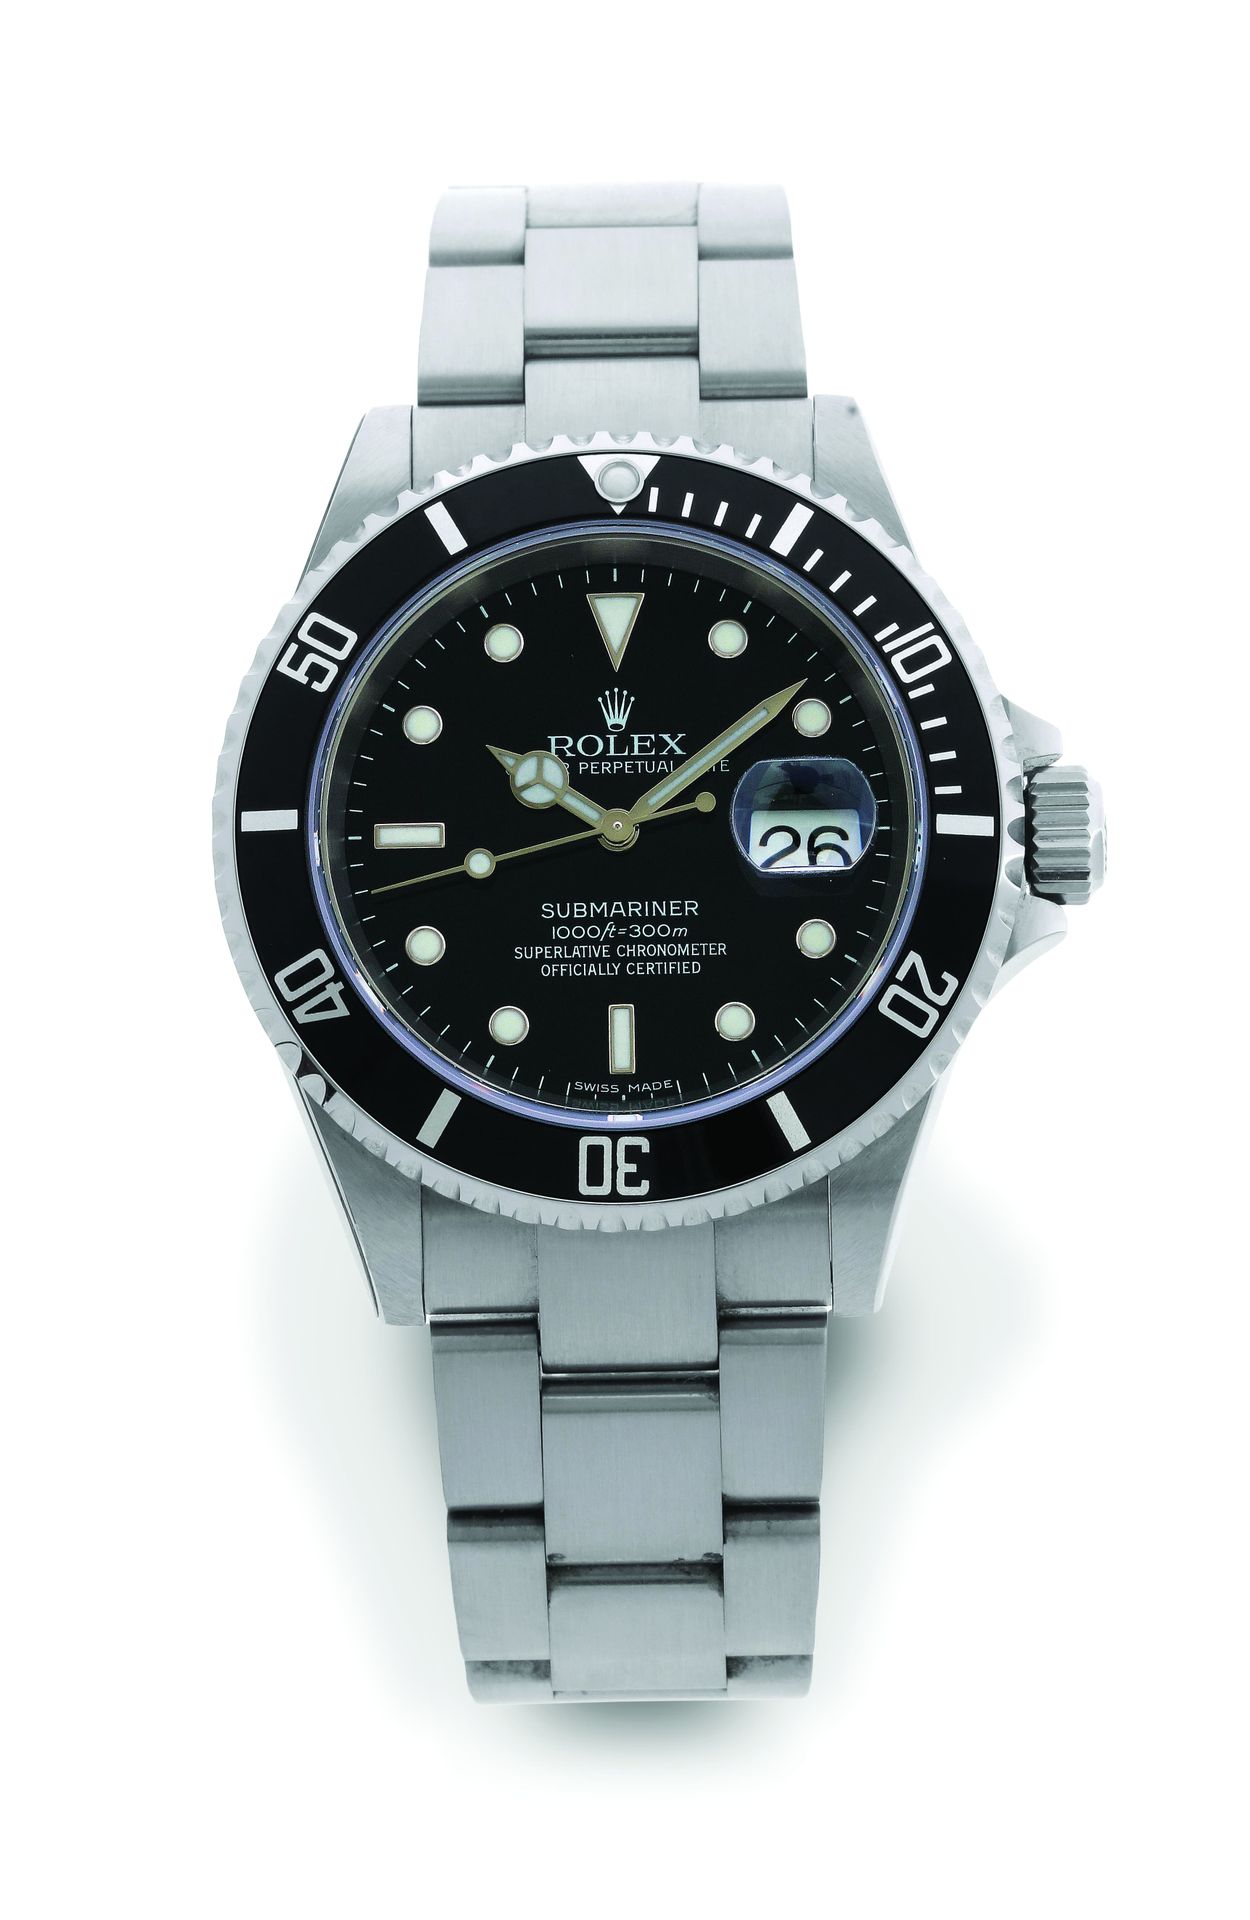 ROLEX Oyster Perpetual Submariner Date
Reference 16610 T
Steel diver's watch wit&hellip;